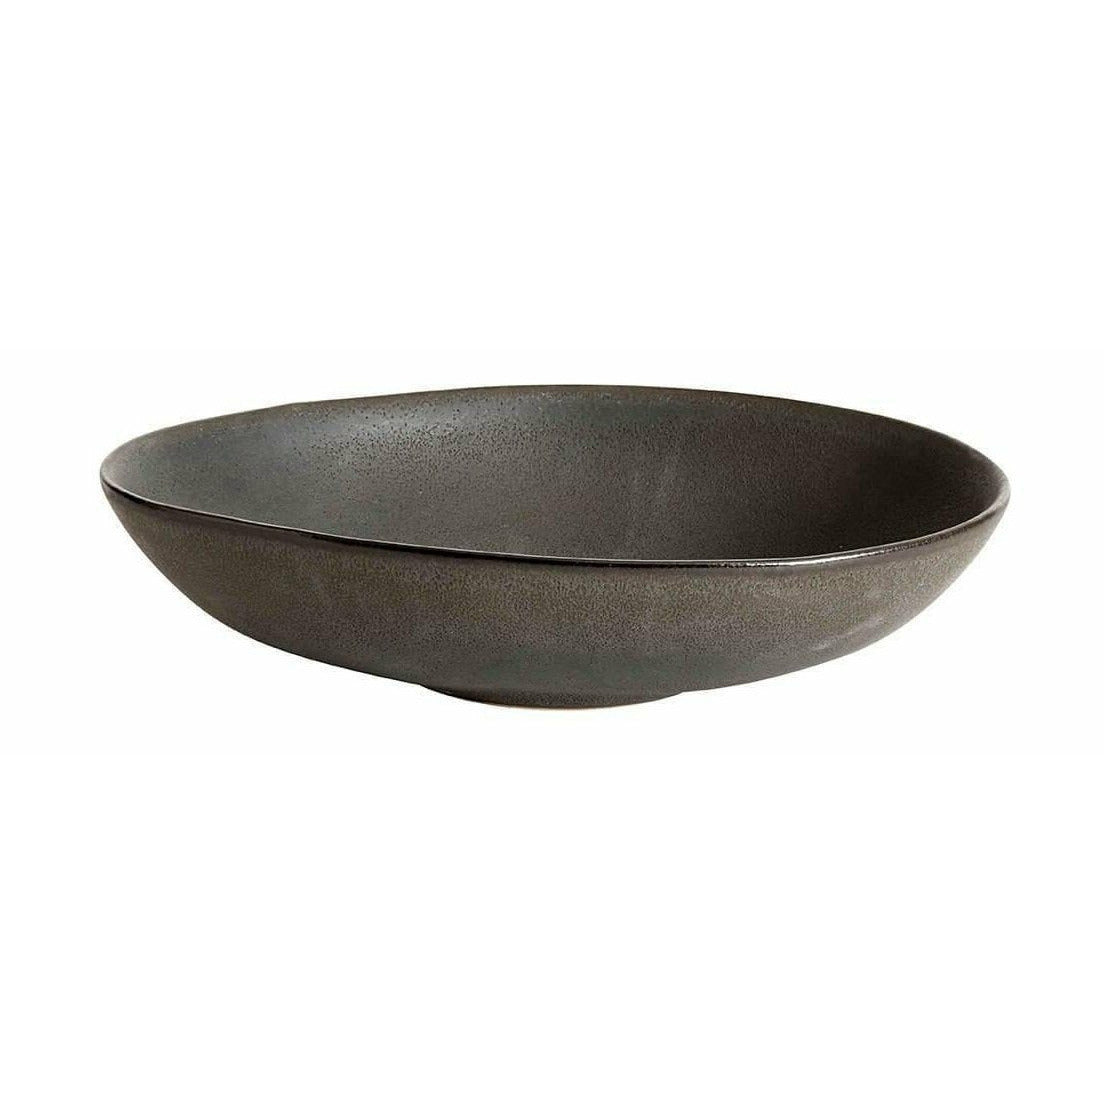 Muubs Mame serwing Bowl Coffee, 19 cm